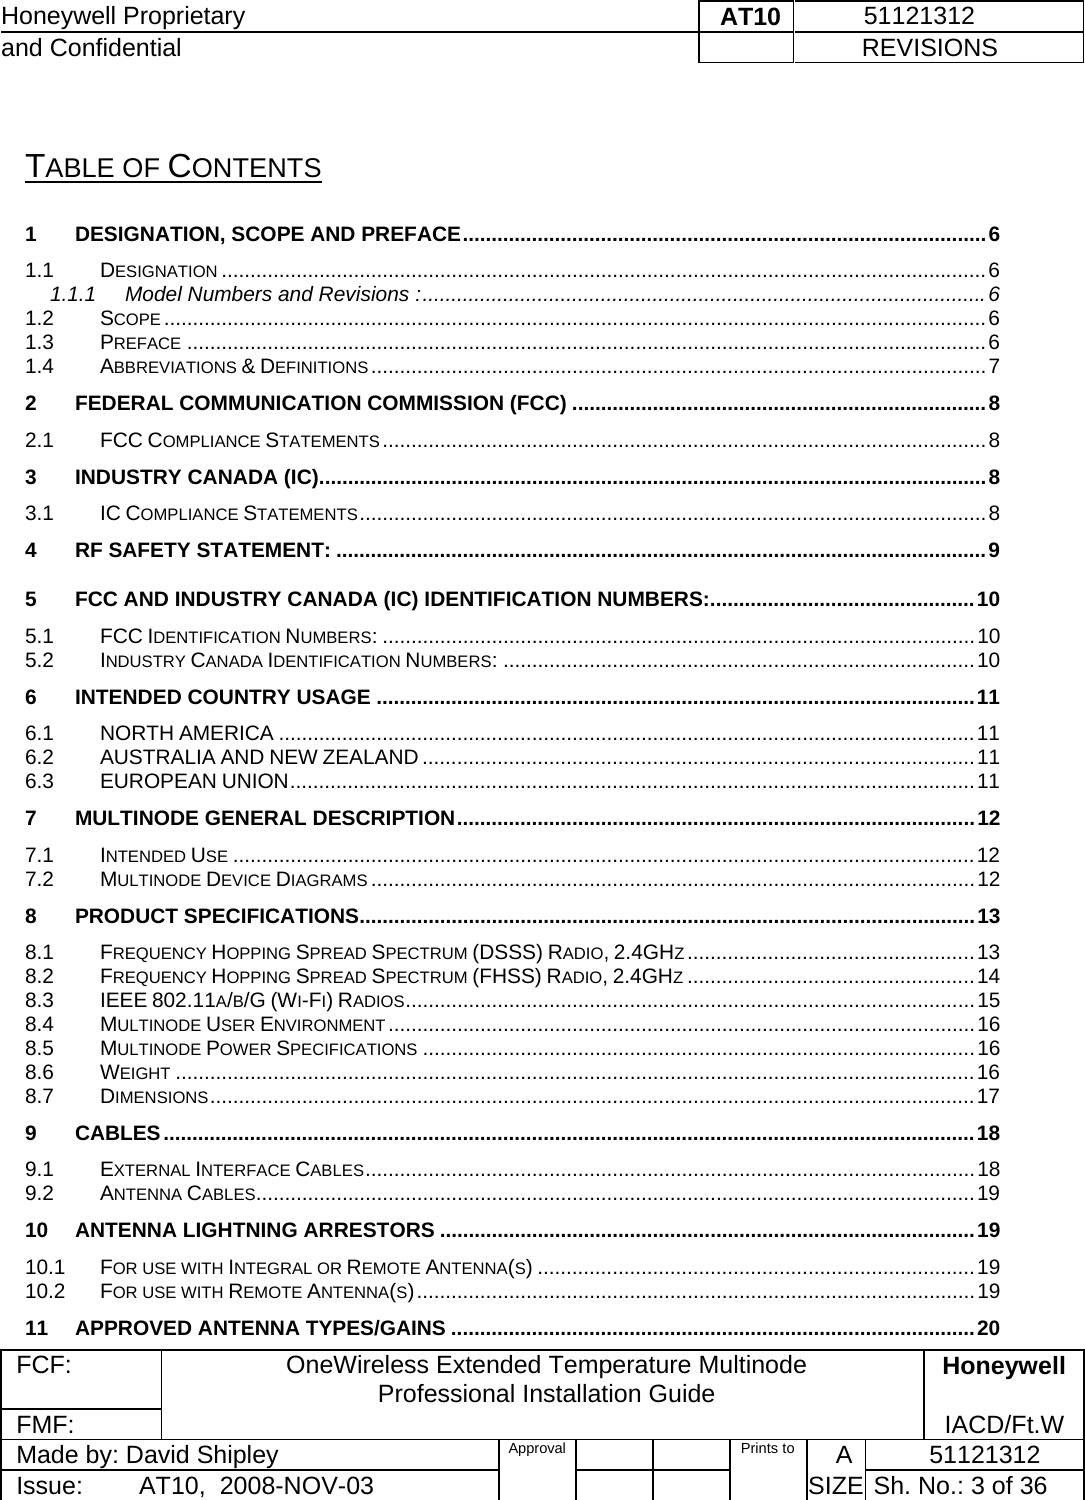 Honeywell Proprietary    AT10           51121312 and Confidential             REVISIONS  FCF: OneWireless Extended Temperature Multinode  Professional Installation Guide  Honeywell FMF:               IACD/Ft.W Made by: David Shipley  Approval   Prints to     A           51121312 Issue:        AT10,  2008-NOV-03          SIZE  Sh. No.: 3 of 36   TABLE OF CONTENTS 1DESIGNATION, SCOPE AND PREFACE ........................................................................................... 61.1DESIGNATION ..................................................................................................................................... 61.1.1Model Numbers and Revisions : .................................................................................................. 61.2SCOPE ............................................................................................................................................... 61.3PREFACE ........................................................................................................................................... 61.4ABBREVIATIONS &amp; DEFINITIONS ........................................................................................................... 72FEDERAL COMMUNICATION COMMISSION (FCC) ........................................................................ 82.1FCC COMPLIANCE STATEMENTS ......................................................................................................... 83INDUSTRY CANADA (IC) .................................................................................................................... 83.1IC COMPLIANCE STATEMENTS .............................................................................................................  84RF SAFETY STATEMENT: ................................................................................................................. 95FCC AND INDUSTRY CANADA (IC) IDENTIFICATION NUMBERS: .............................................. 105.1FCC IDENTIFICATION NUMBERS: ....................................................................................................... 105.2INDUSTRY CANADA IDENTIFICATION NUMBERS: .................................................................................. 106INTENDED COUNTRY USAGE ........................................................................................................ 116.1NORTH AMERICA ......................................................................................................................... 116.2AUSTRALIA AND NEW ZEALAND ................................................................................................ 116.3EUROPEAN UNION .......................................................................................................................  117MULTINODE GENERAL DESCRIPTION .......................................................................................... 127.1INTENDED USE ................................................................................................................................. 127.2MULTINODE DEVICE DIAGRAMS ......................................................................................................... 128PRODUCT SPECIFICATIONS ........................................................................................................... 138.1FREQUENCY HOPPING SPREAD SPECTRUM (DSSS) RADIO, 2.4GHZ .................................................. 138.2FREQUENCY HOPPING SPREAD SPECTRUM (FHSS) RADIO, 2.4GHZ .................................................. 148.3IEEE 802.11A/B/G (WI-FI) RADIOS ................................................................................................... 158.4MULTINODE USER ENVIRONMENT ...................................................................................................... 168.5MULTINODE POWER SPECIFICATIONS ................................................................................................ 168.6WEIGHT ........................................................................................................................................... 168.7DIMENSIONS ..................................................................................................................................... 179CABLES ............................................................................................................................................. 189.1EXTERNAL INTERFACE CABLES ..........................................................................................................  189.2ANTENNA CABLES............................................................................................................................. 1910ANTENNA LIGHTNING ARRESTORS ............................................................................................. 1910.1FOR USE WITH INTEGRAL OR REMOTE ANTENNA(S) ............................................................................ 1910.2FOR USE WITH REMOTE ANTENNA(S) ................................................................................................. 1911APPROVED ANTENNA TYPES/GAINS ........................................................................................... 20